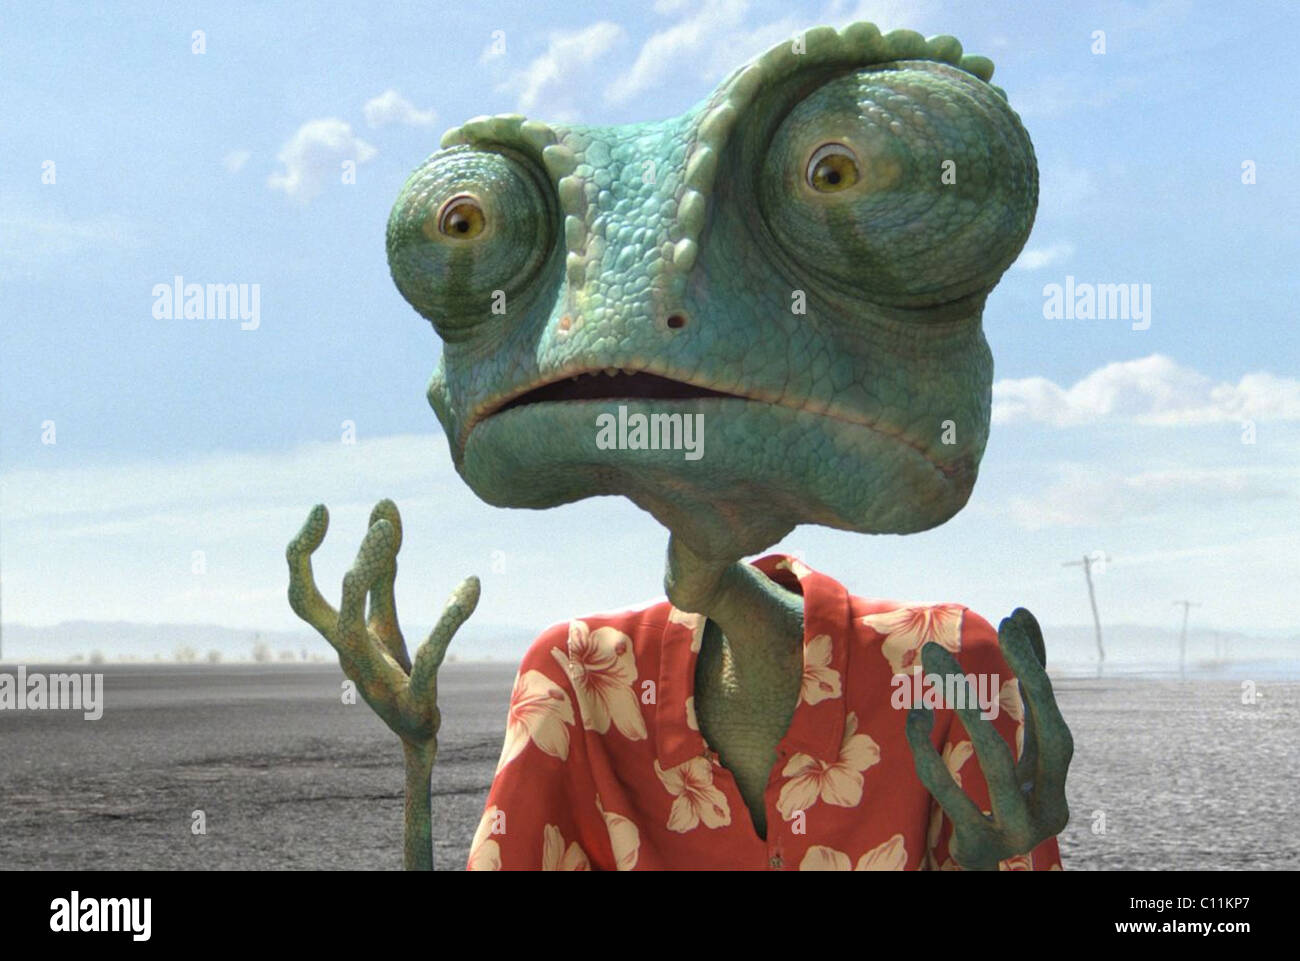 Rango movie hi-res stock photography and images - Alamy